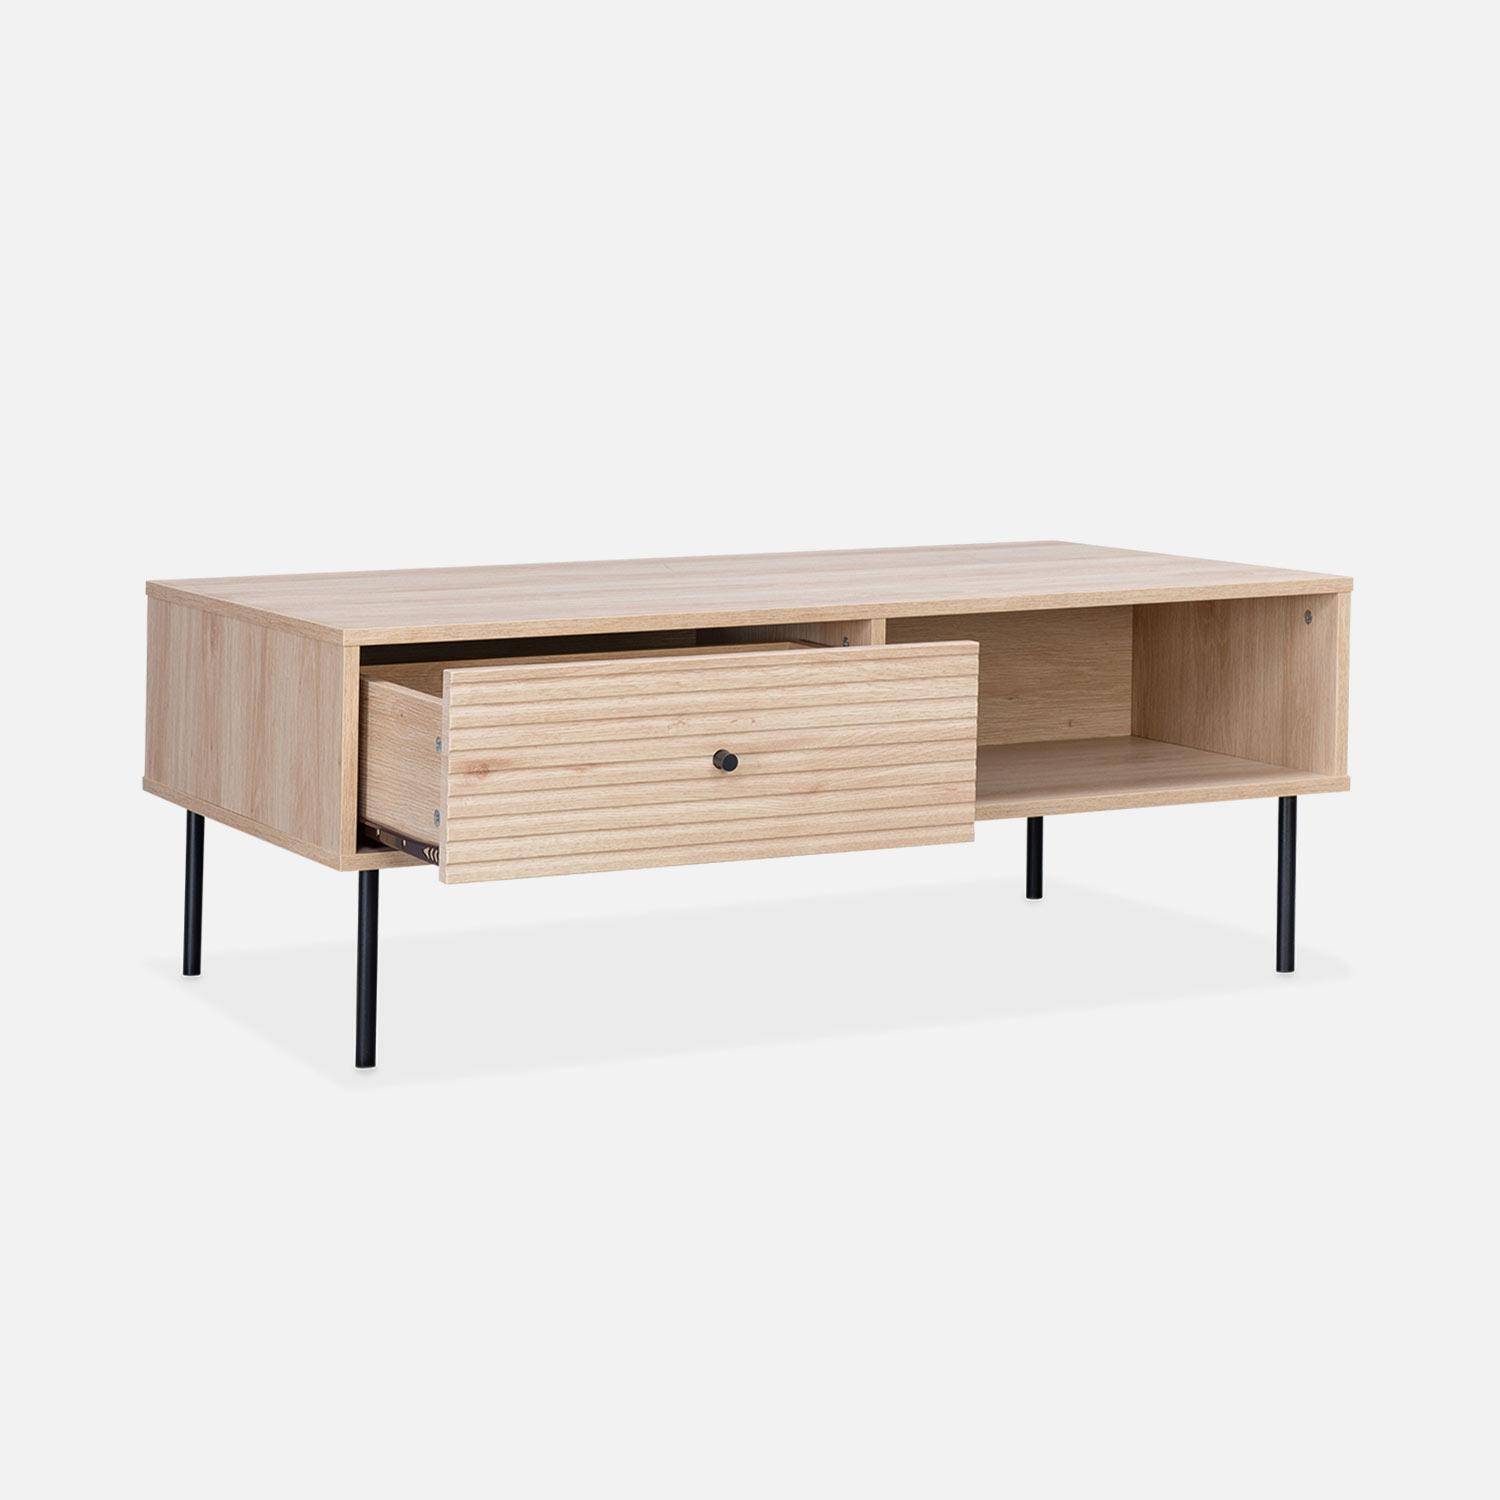 Grooved wood-effect coffee table with one drawer and storage nook, 110x59x41cm - Braga - Natural,sweeek,Photo6